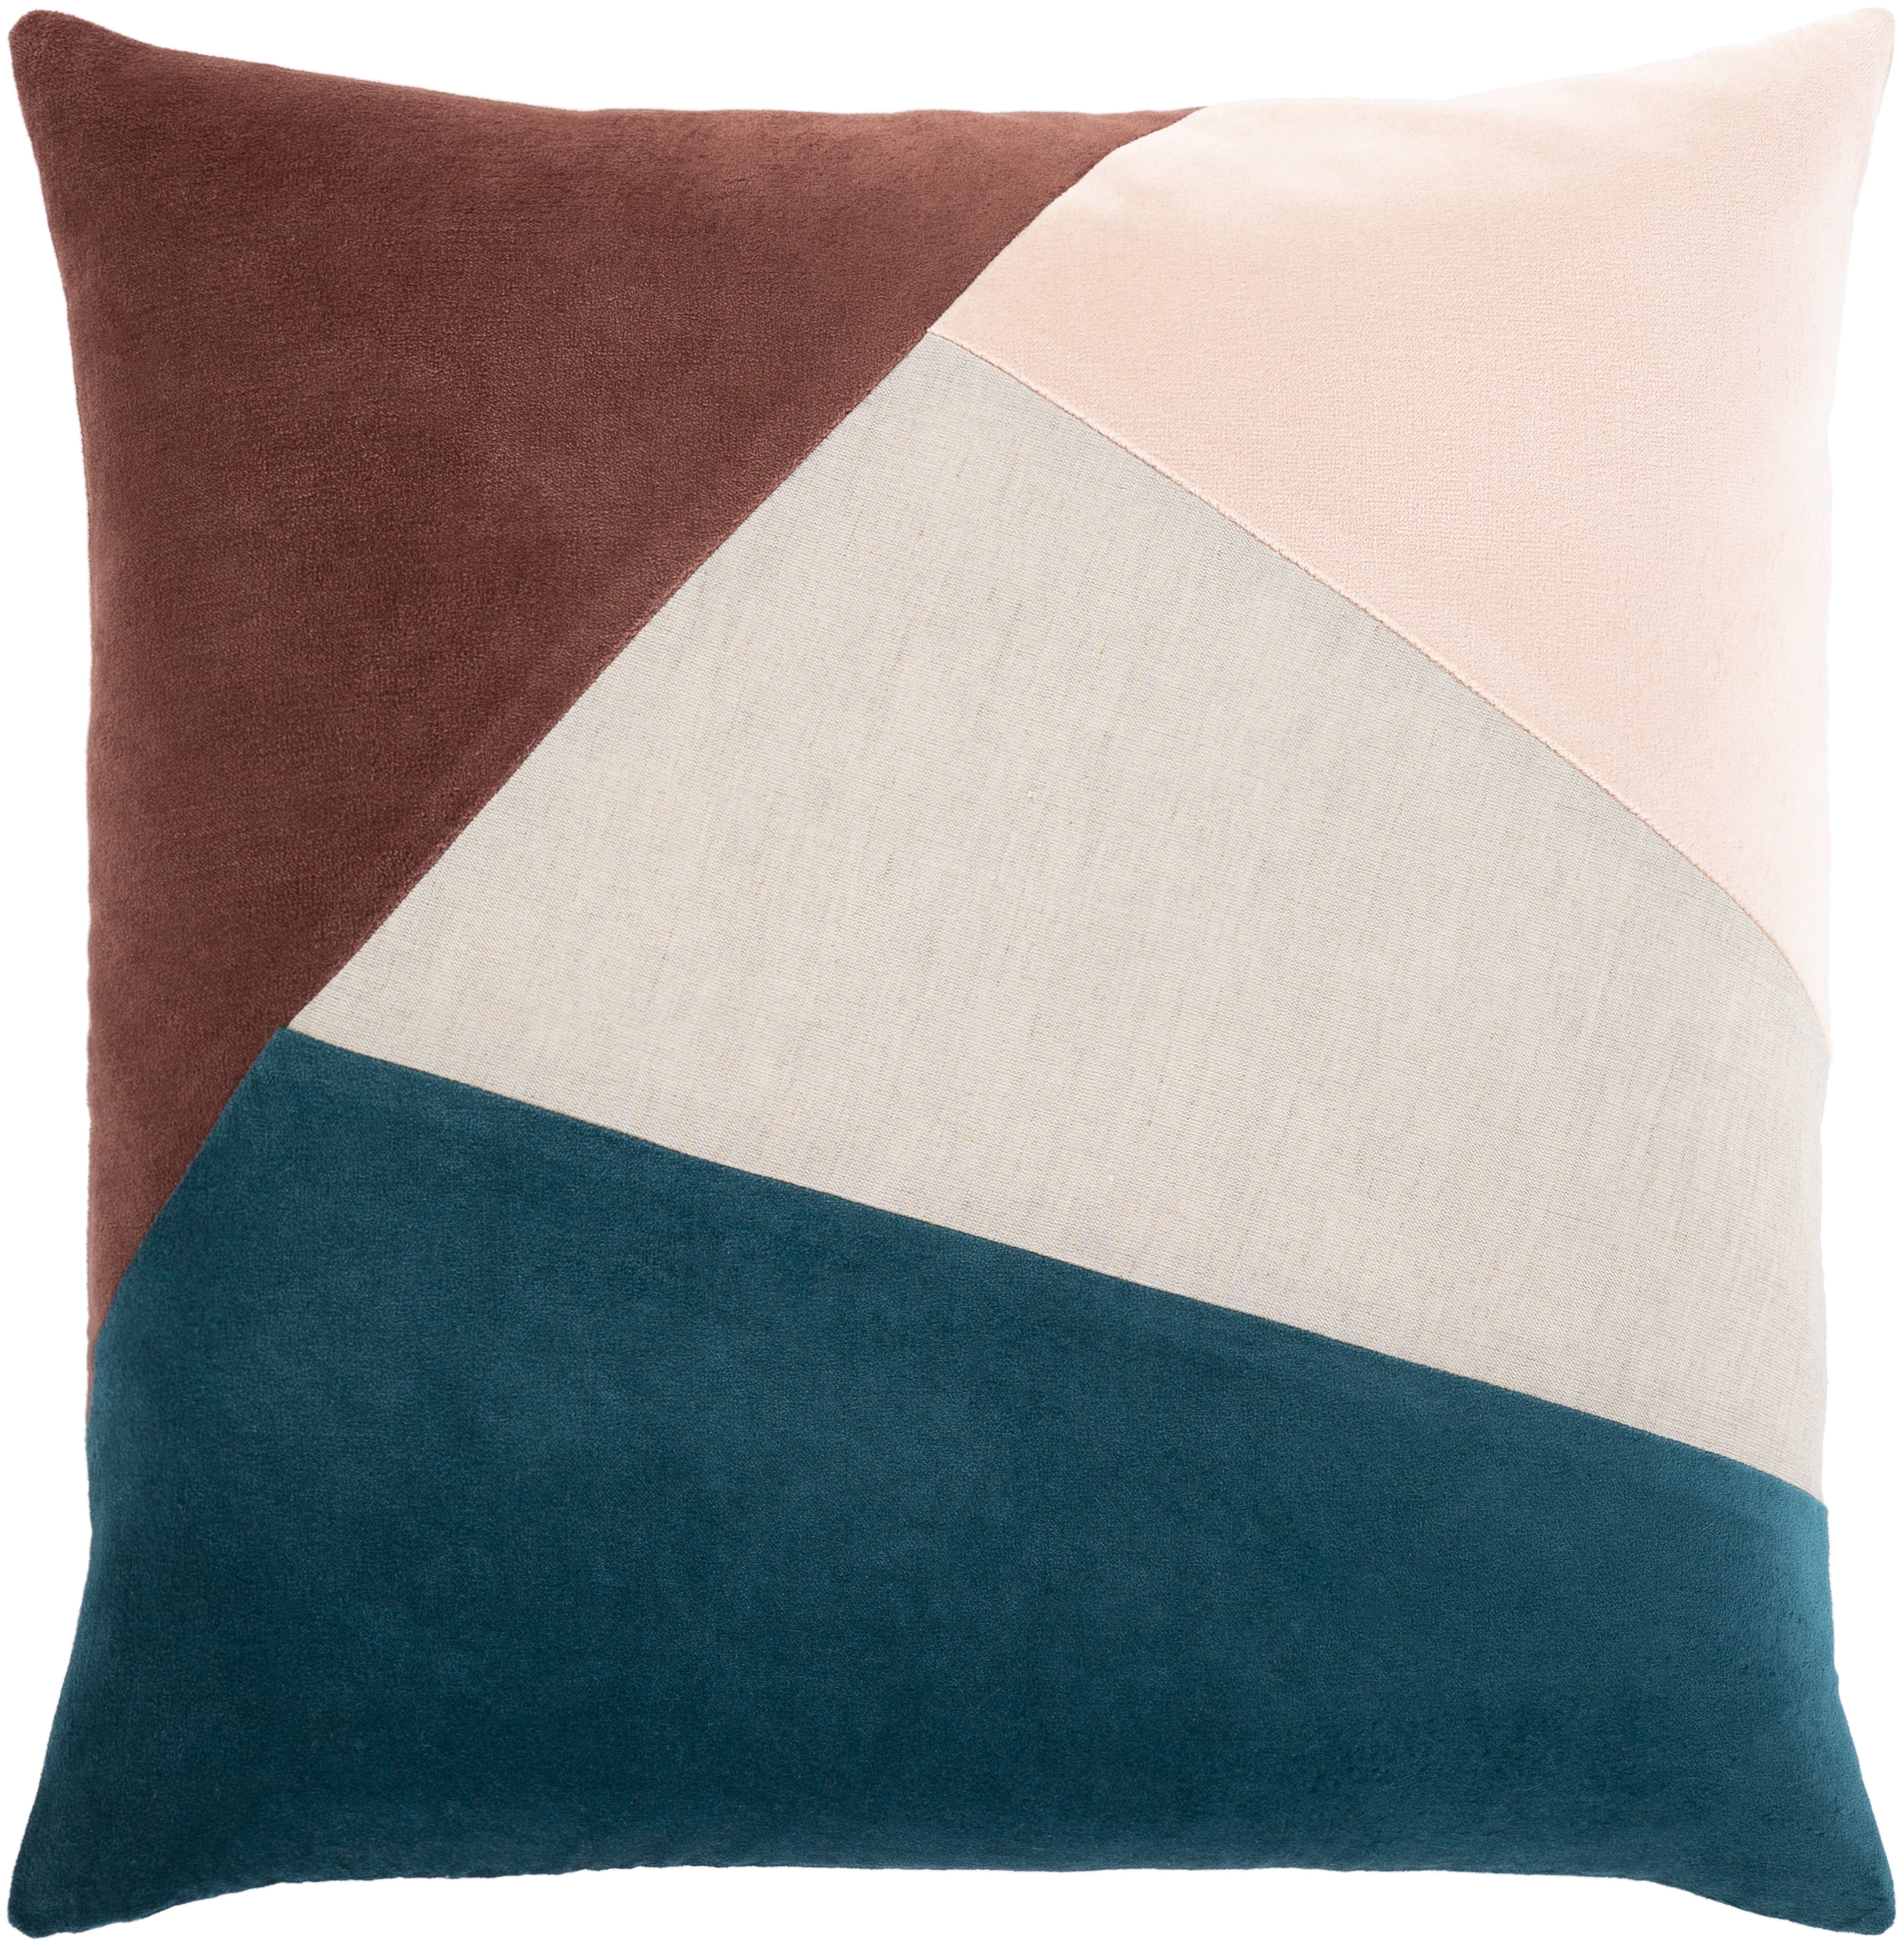 Moza Throw Pillow, 18" x 18", with down insert - Surya